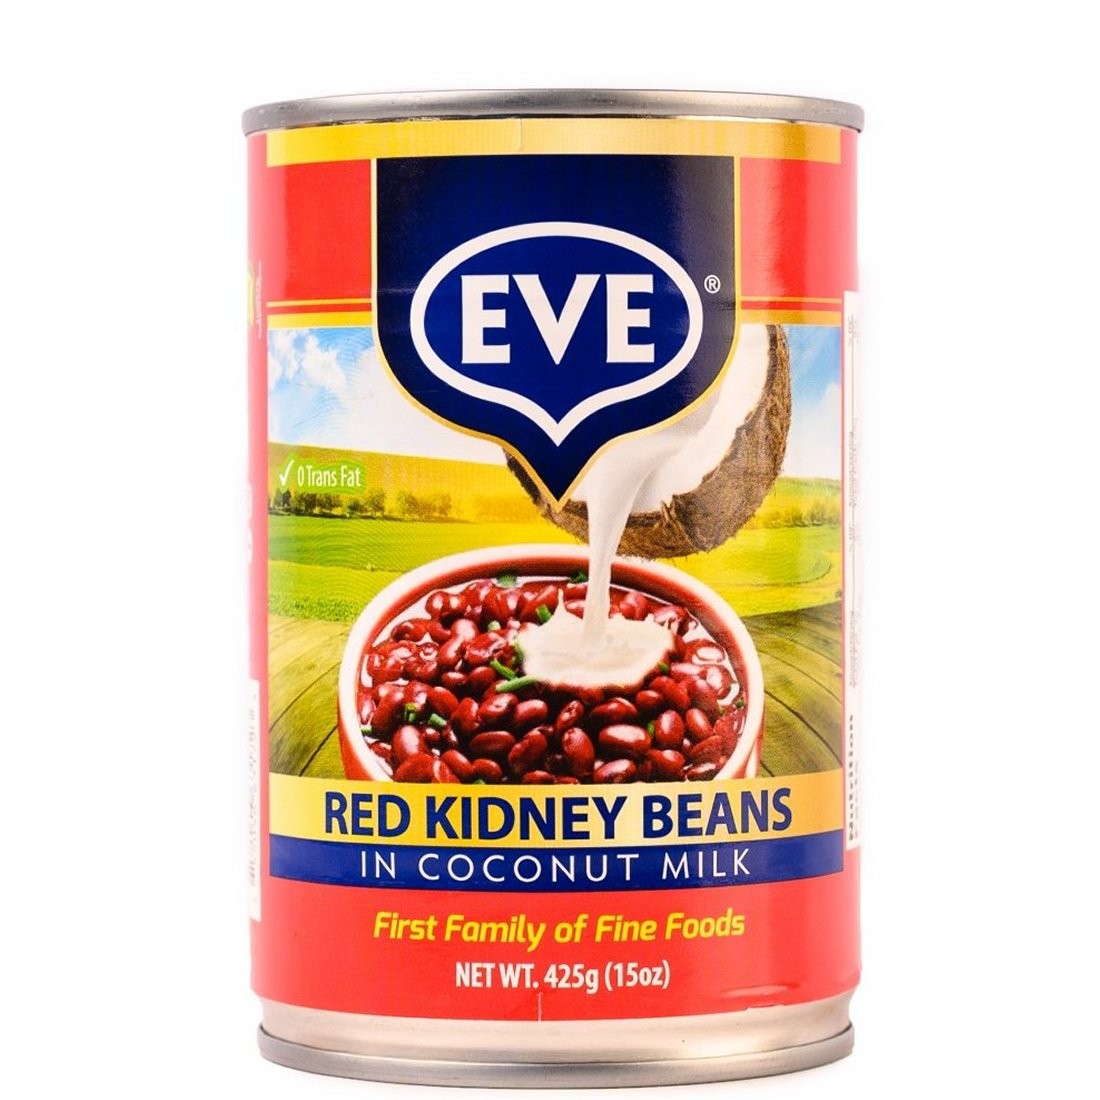 EVE BEANS RED KIDNEY 400g